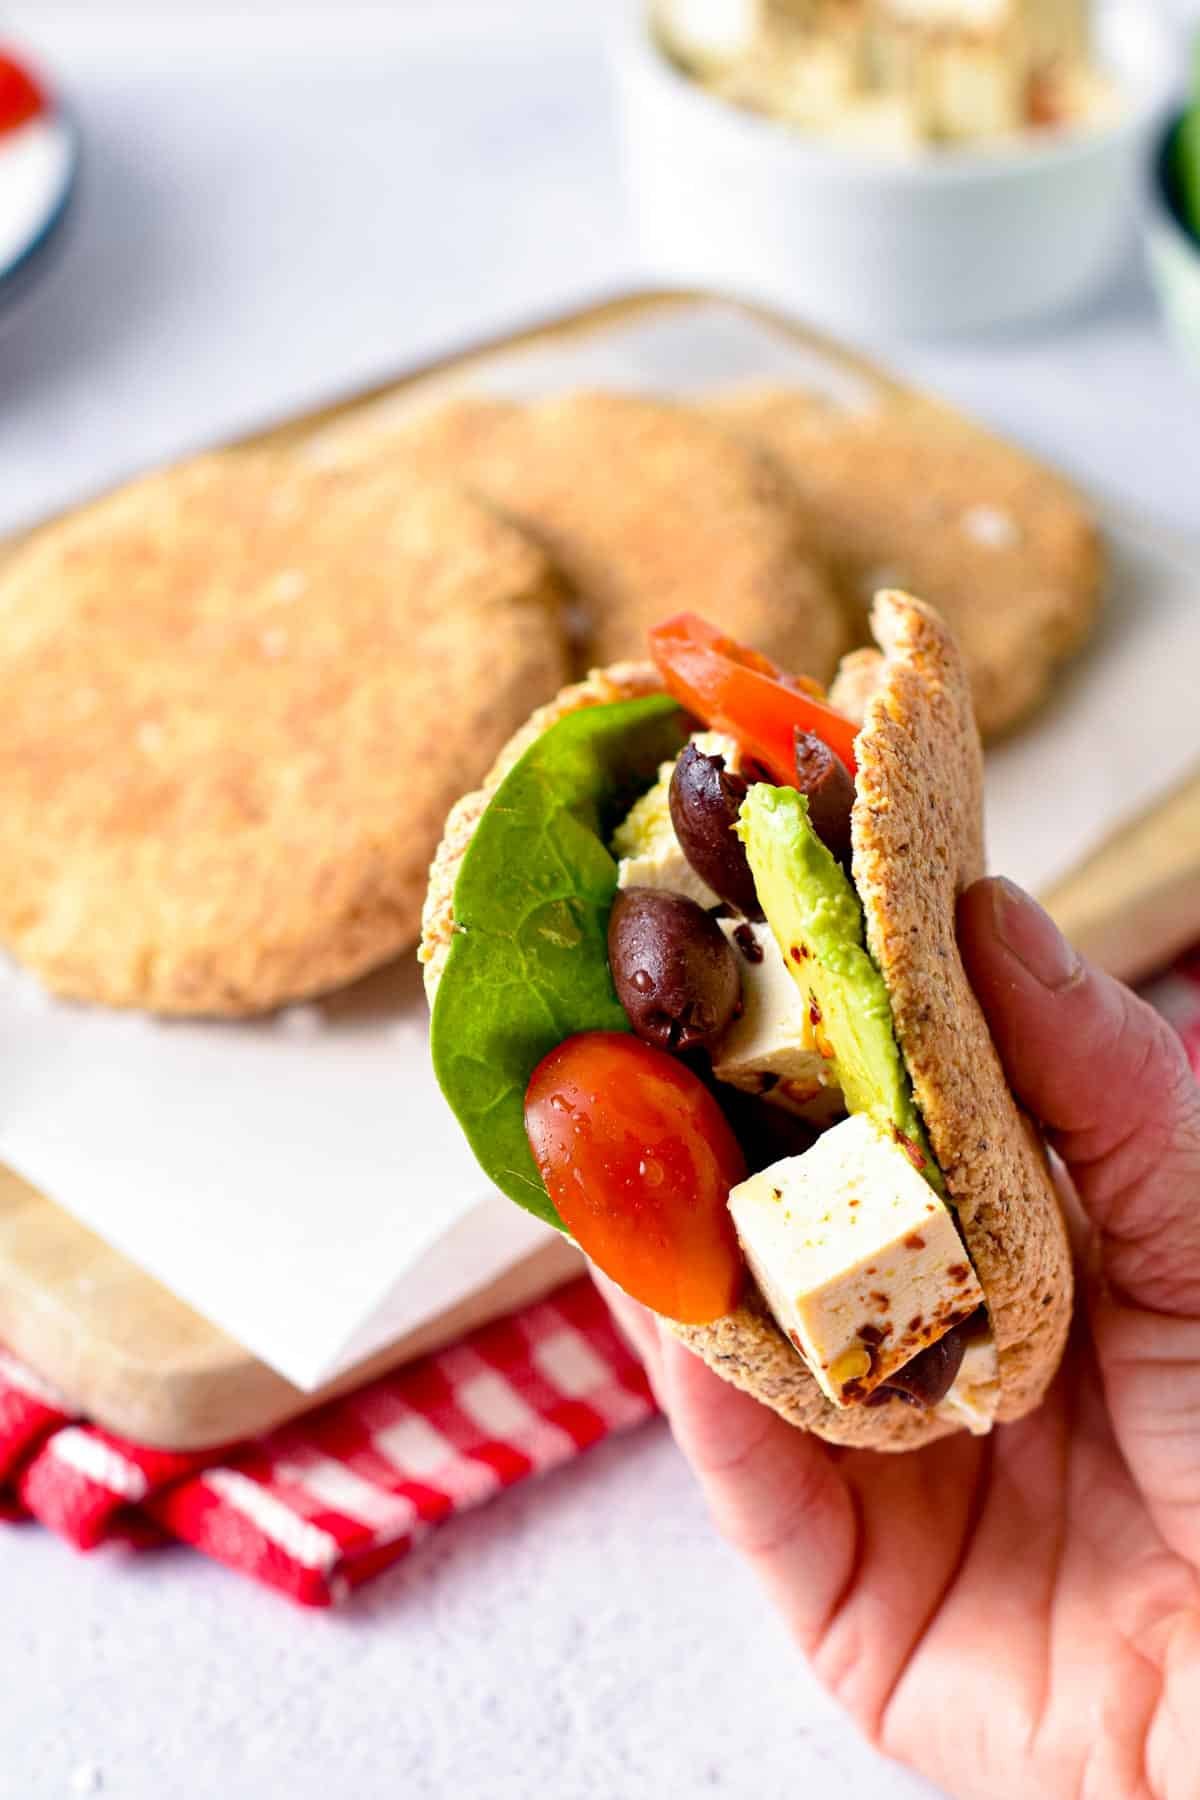 These low carb pita bread are soft, pita flatbread made from low-carb flours and no eggs so you can share with your vegan keto guest. Plus, one pita bread only contains 4.4 g net carbs and they are gluten-free.These low carb pita bread are soft, pita flatbread made from low-carb flours and no eggs so you can share with your vegan keto guest. Plus, one pita bread only contains 4.4 g net carbs and they are gluten-free.